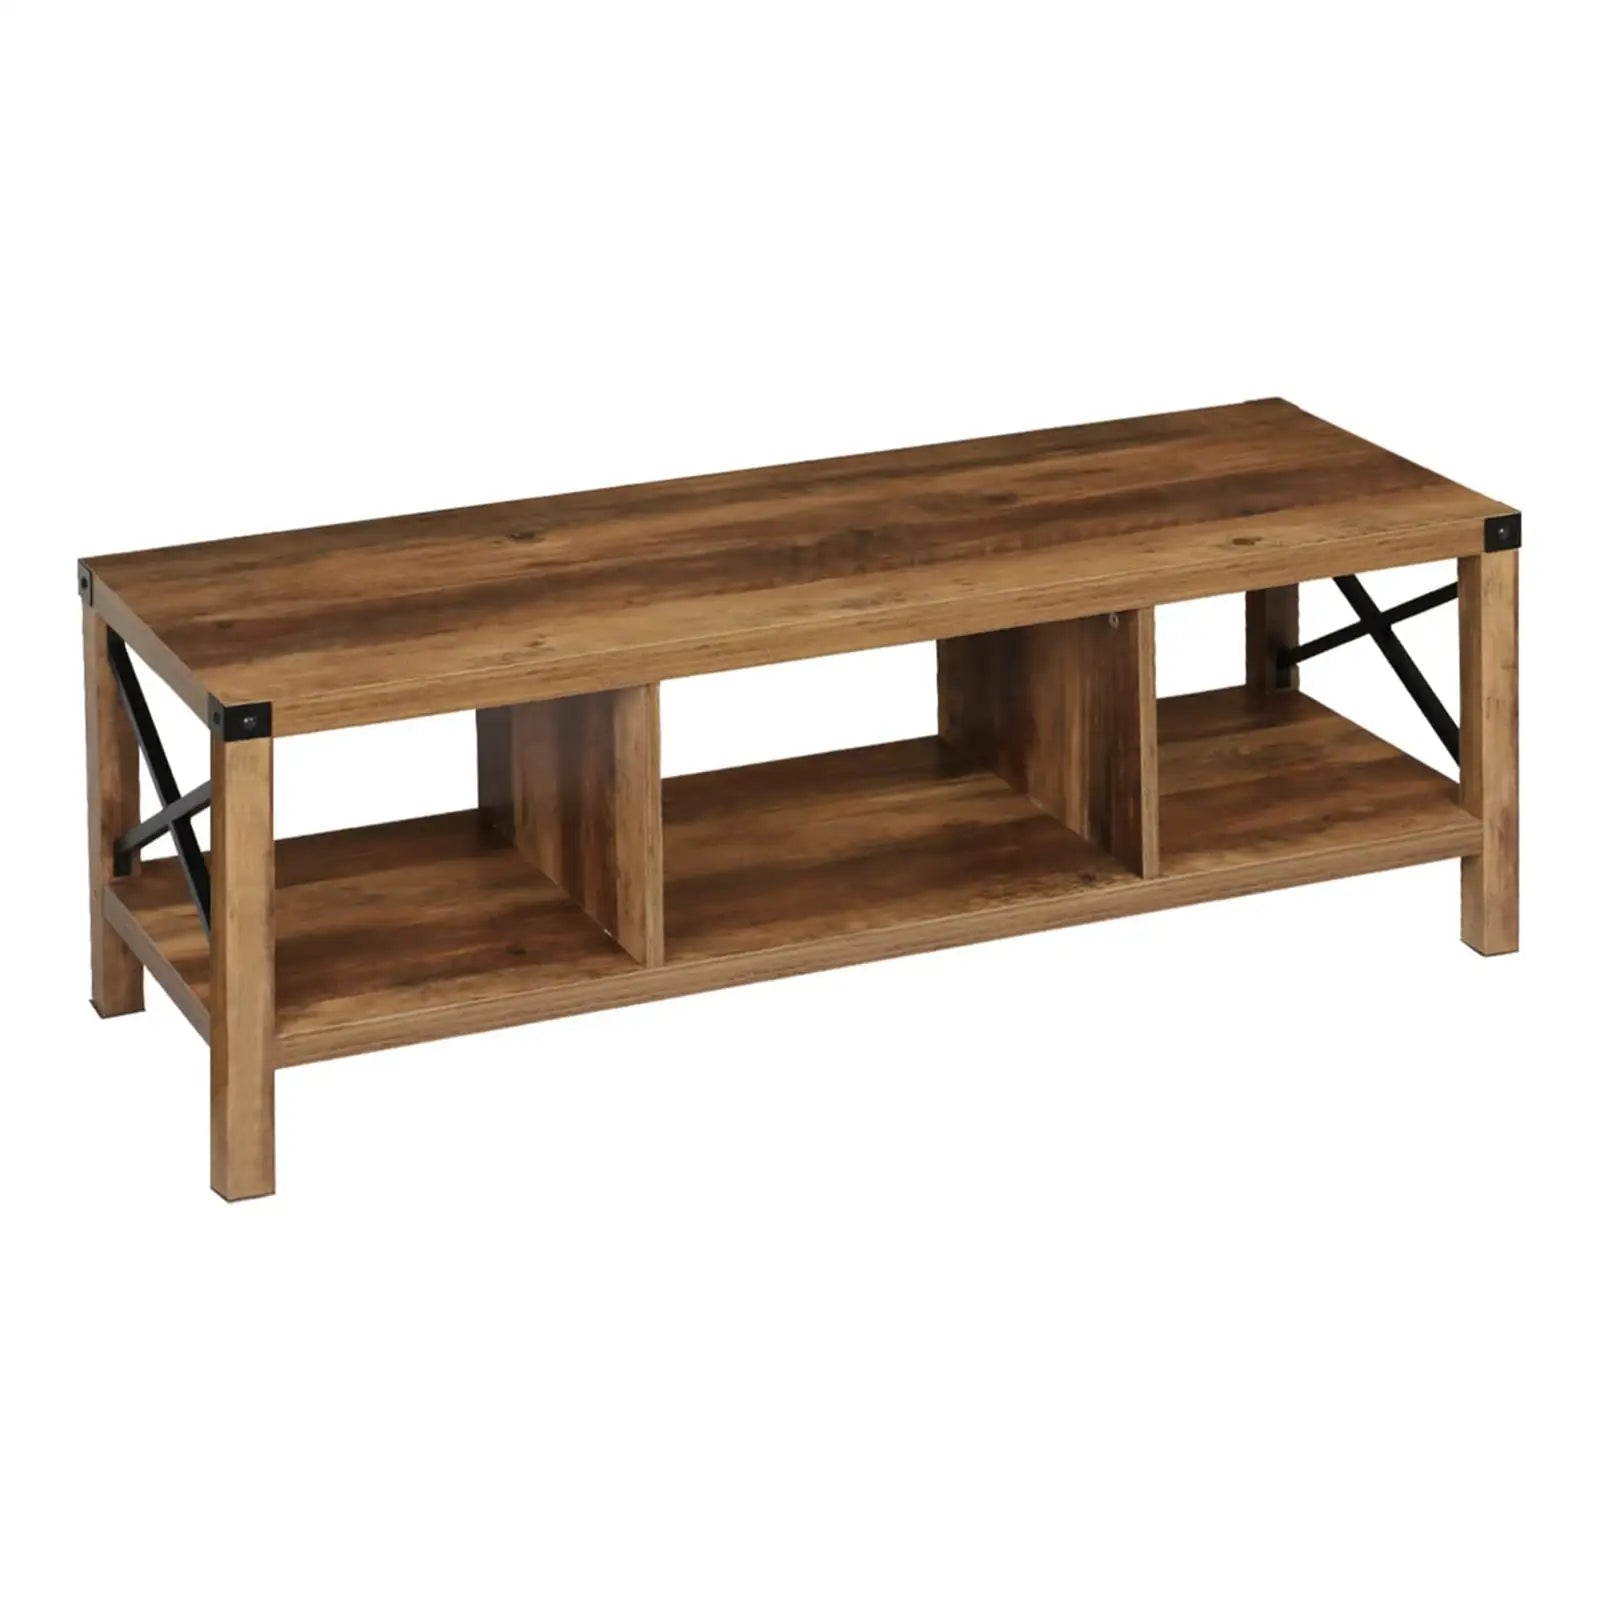 Farmhouse Wooden Coffee Table with Open Storage Shelves